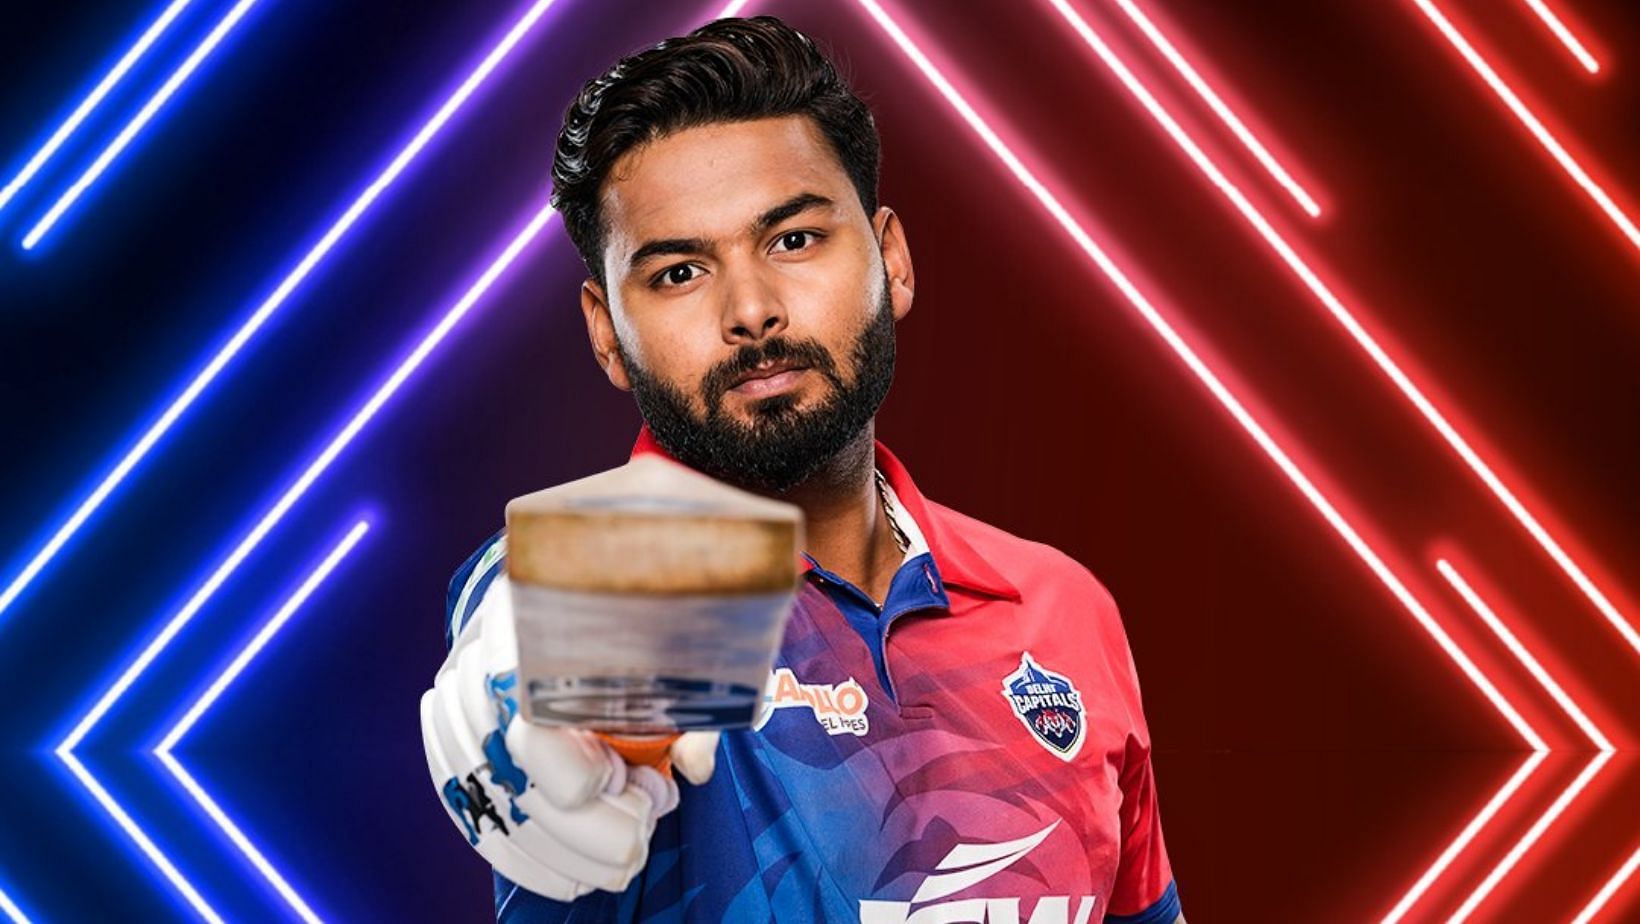 Rishabh Pant is expected to return back to DC